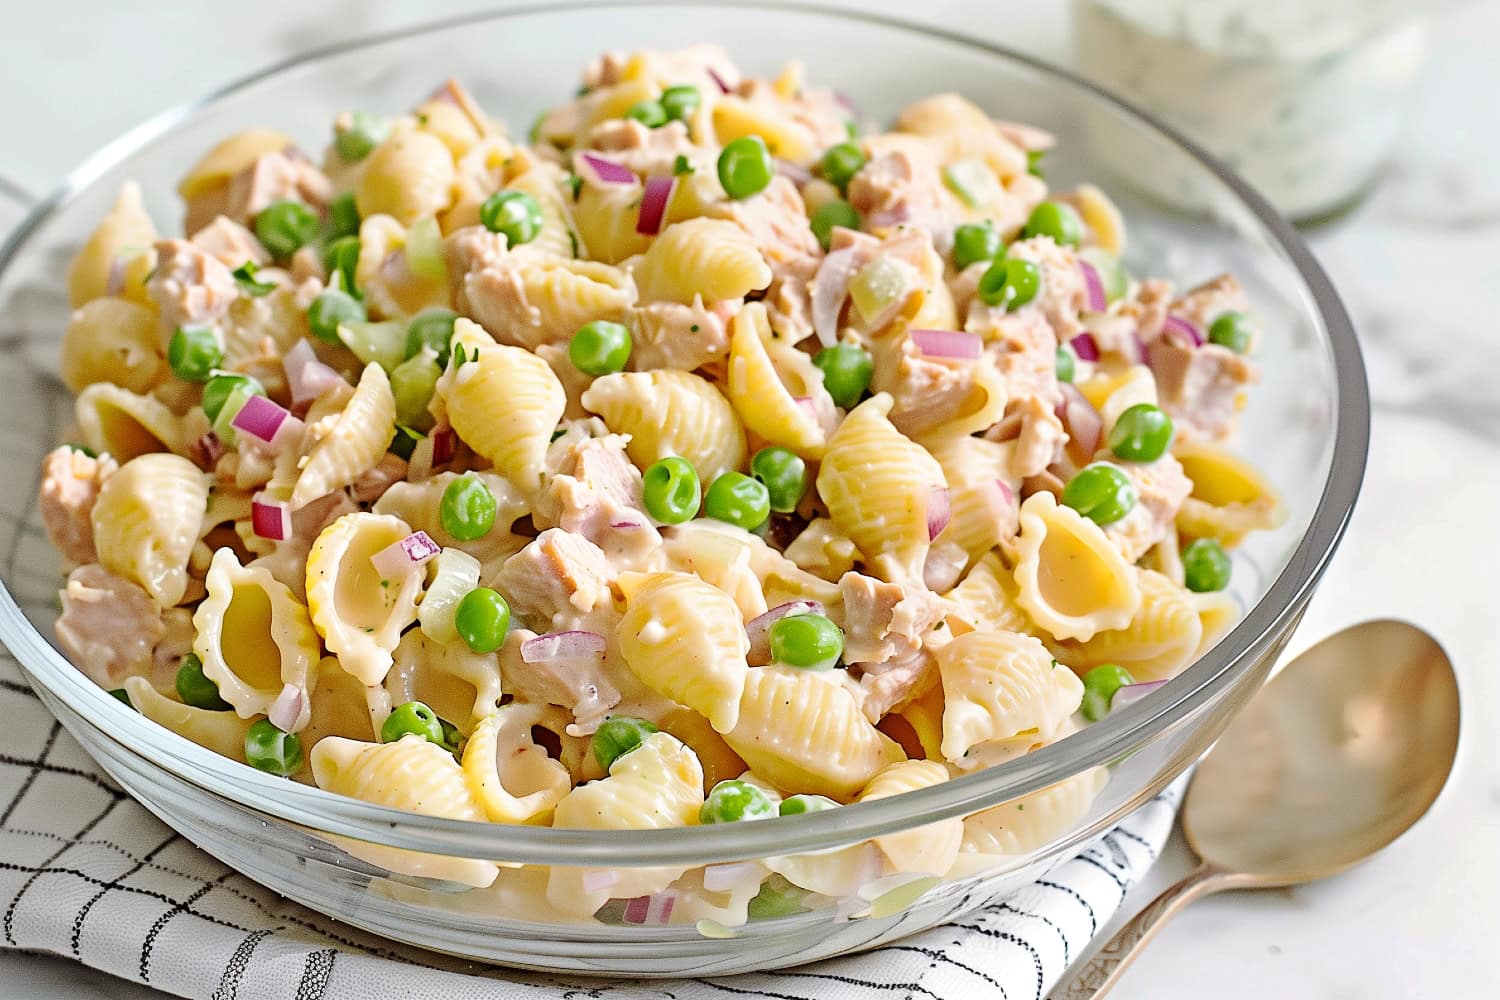 A glass bowl of creamy homemade tuna pasta salad on a white marble table.